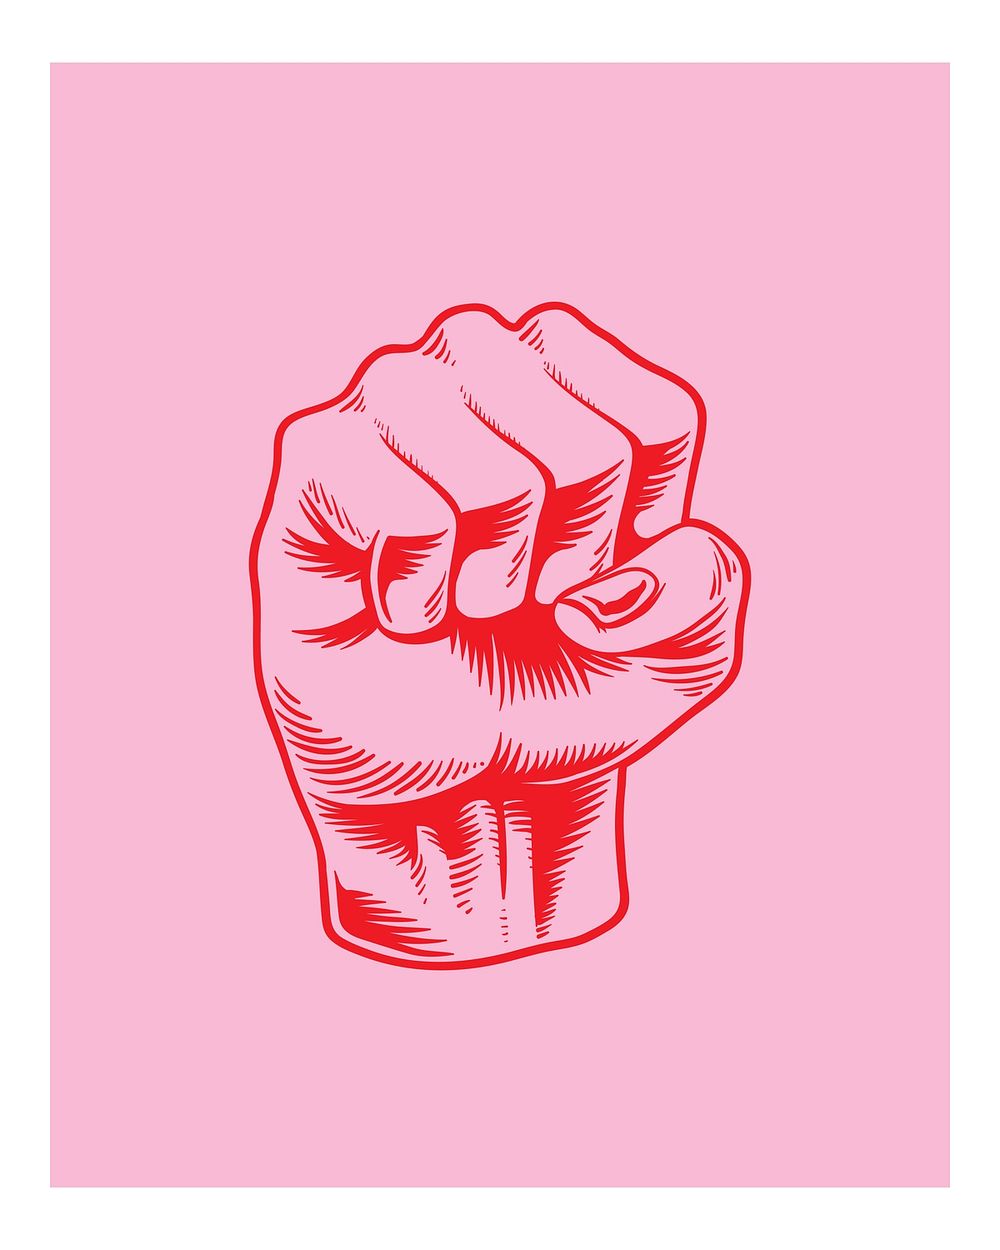 Pink fist illustration wall art print and poster.